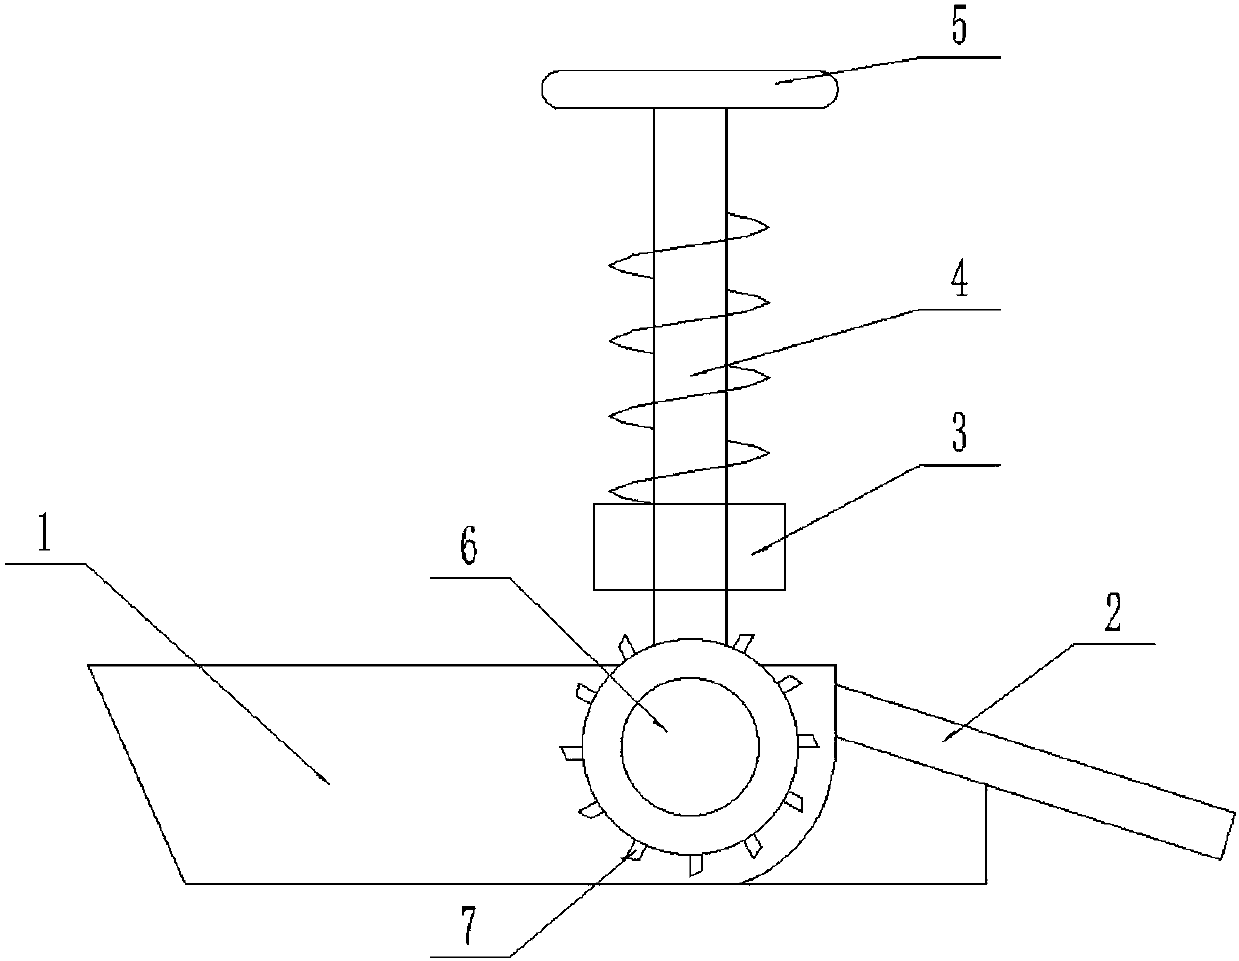 Scrap iron collecting device applied to machining